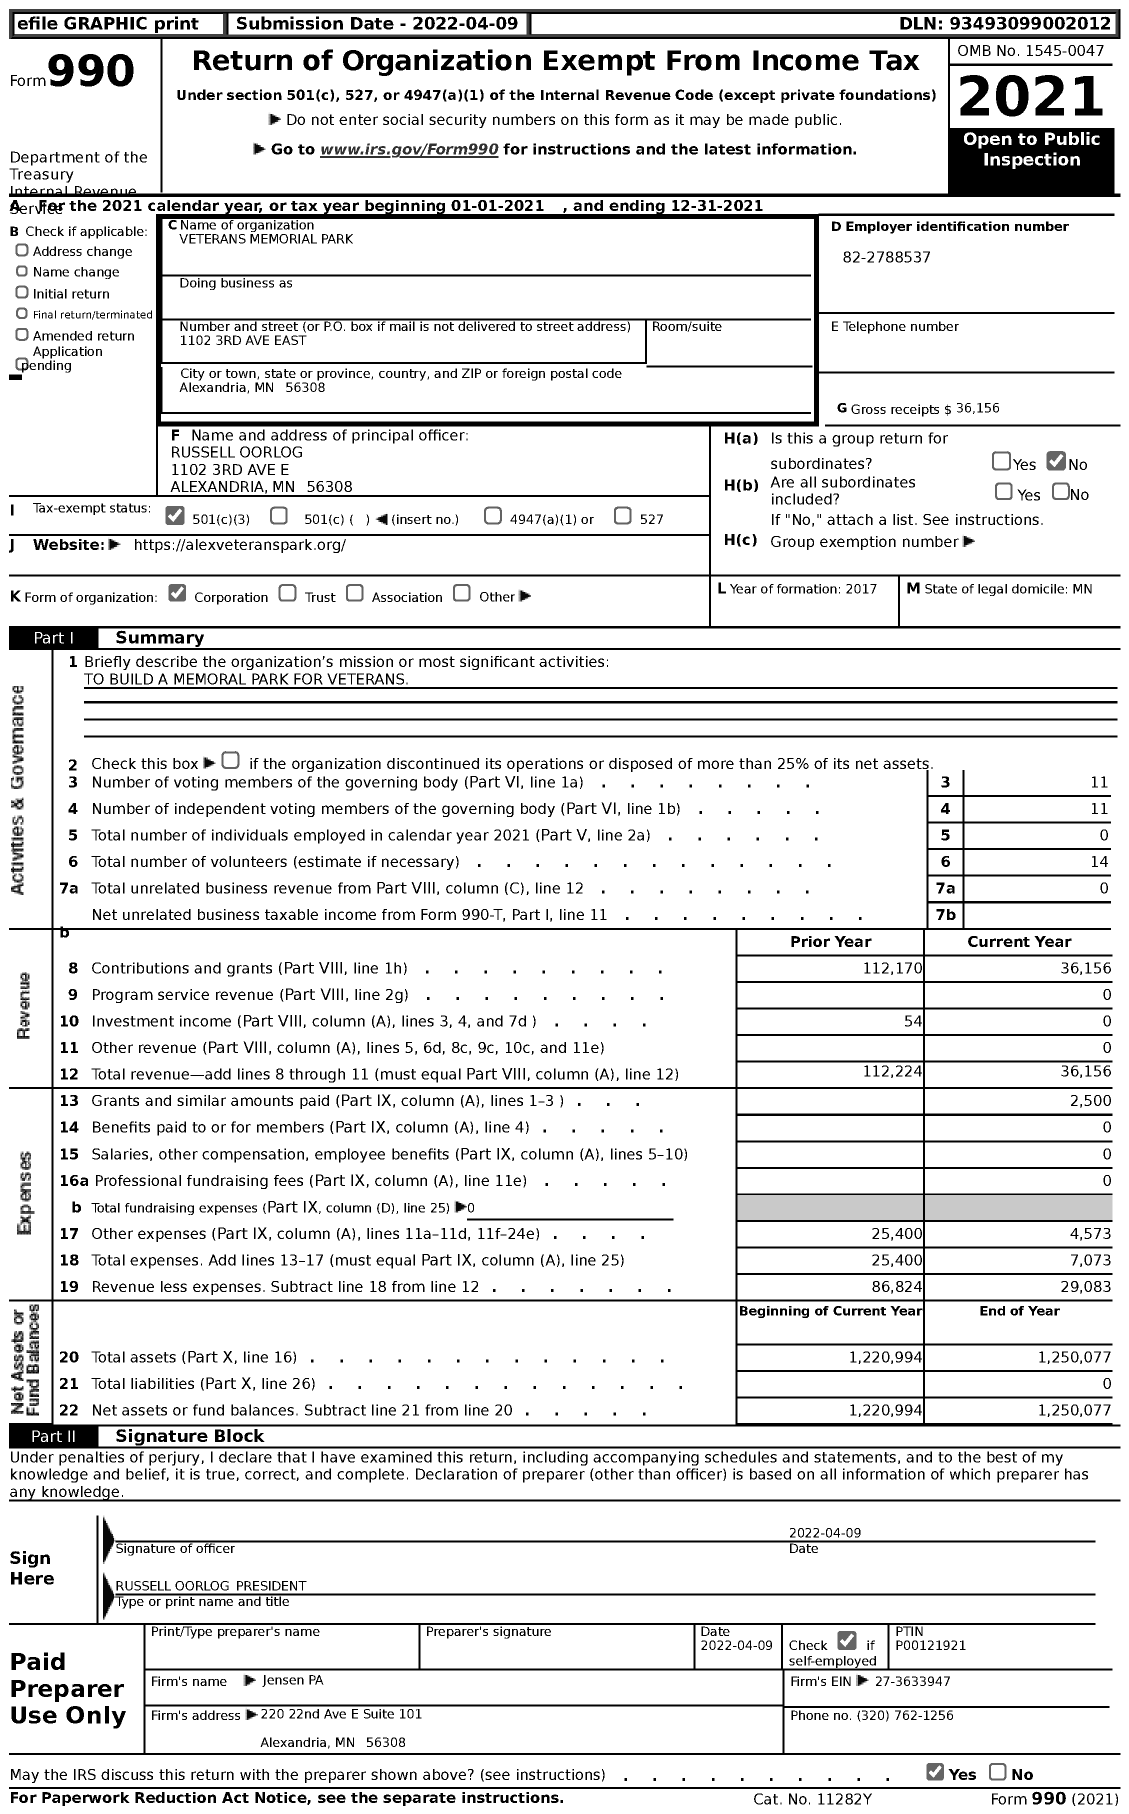 Image of first page of 2021 Form 990 for Veterans Memorial Park